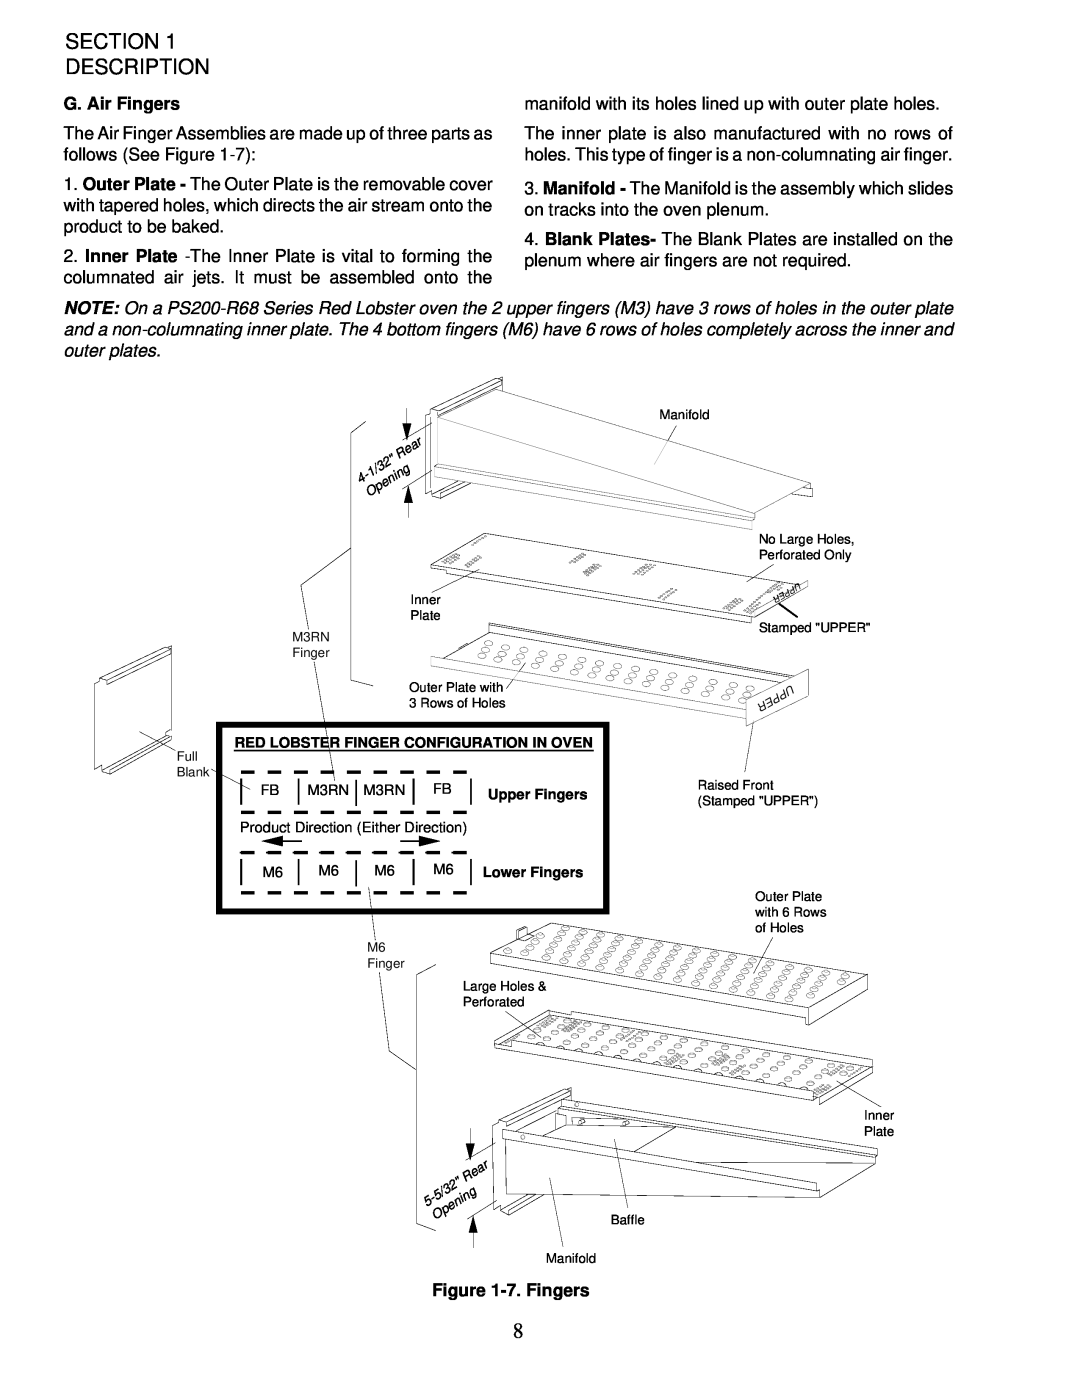 Middleby Marshall PS200-R68 Section Description, G. Air Fingers, 7.Fingers, Red Lobster Finger Configuration In Oven 